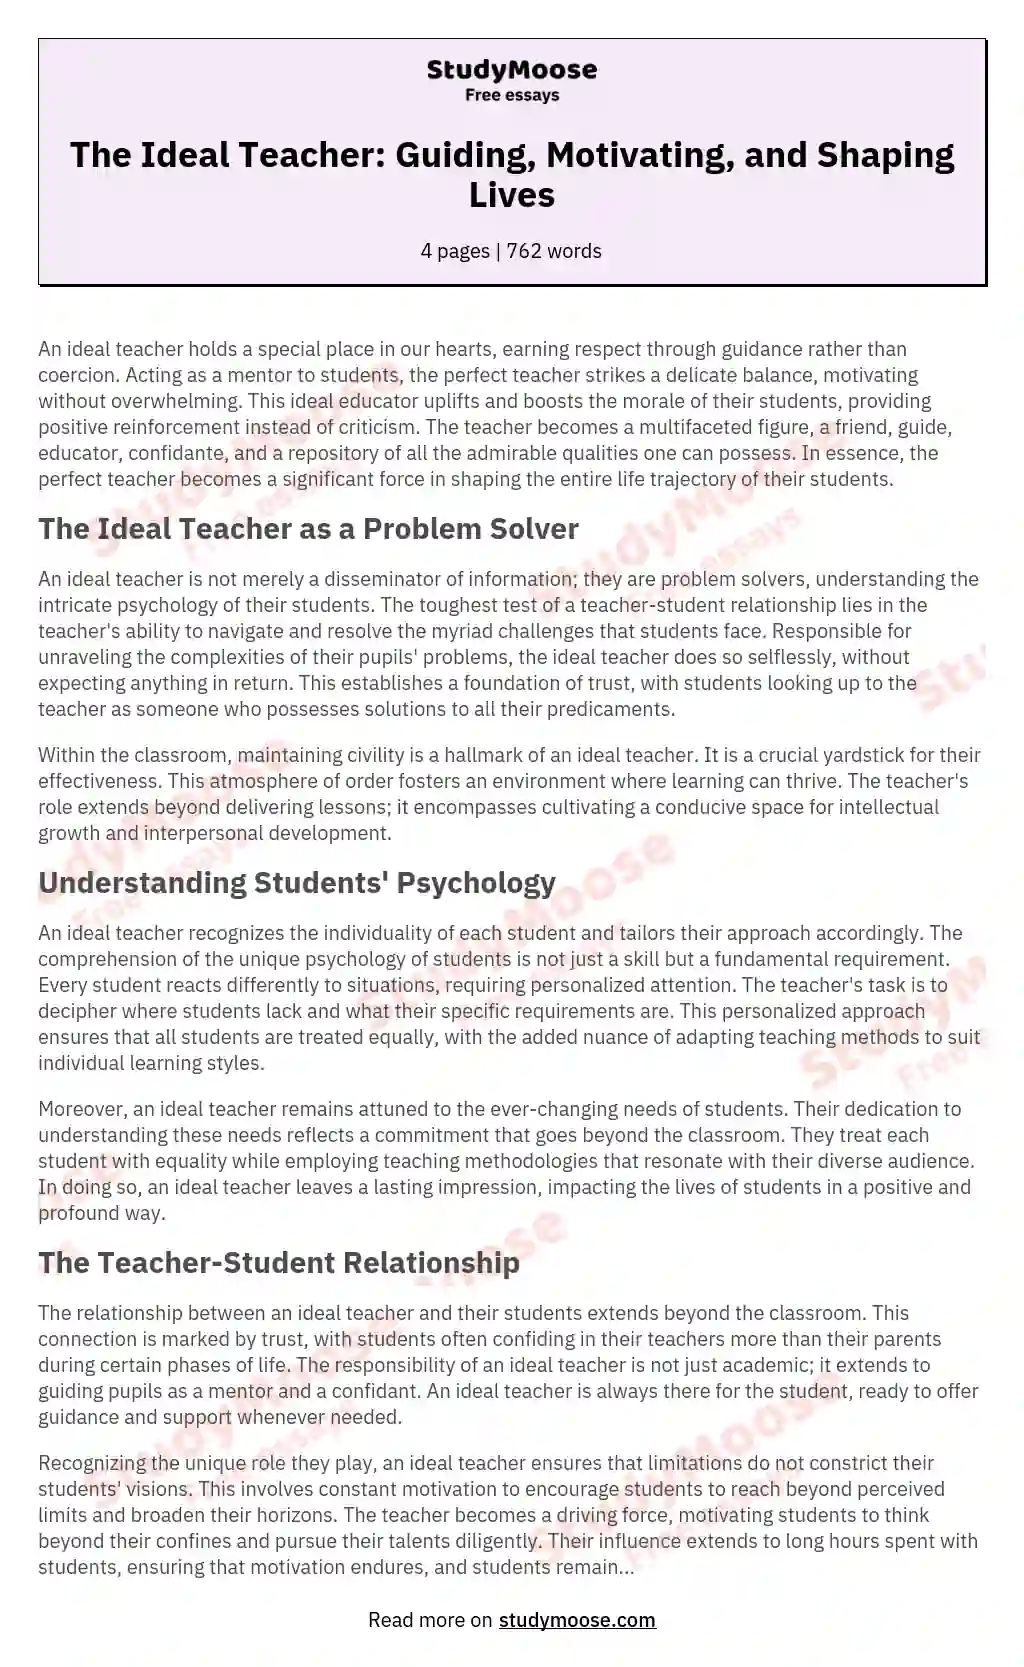 The Ideal Teacher: Guiding, Motivating, and Shaping Lives essay